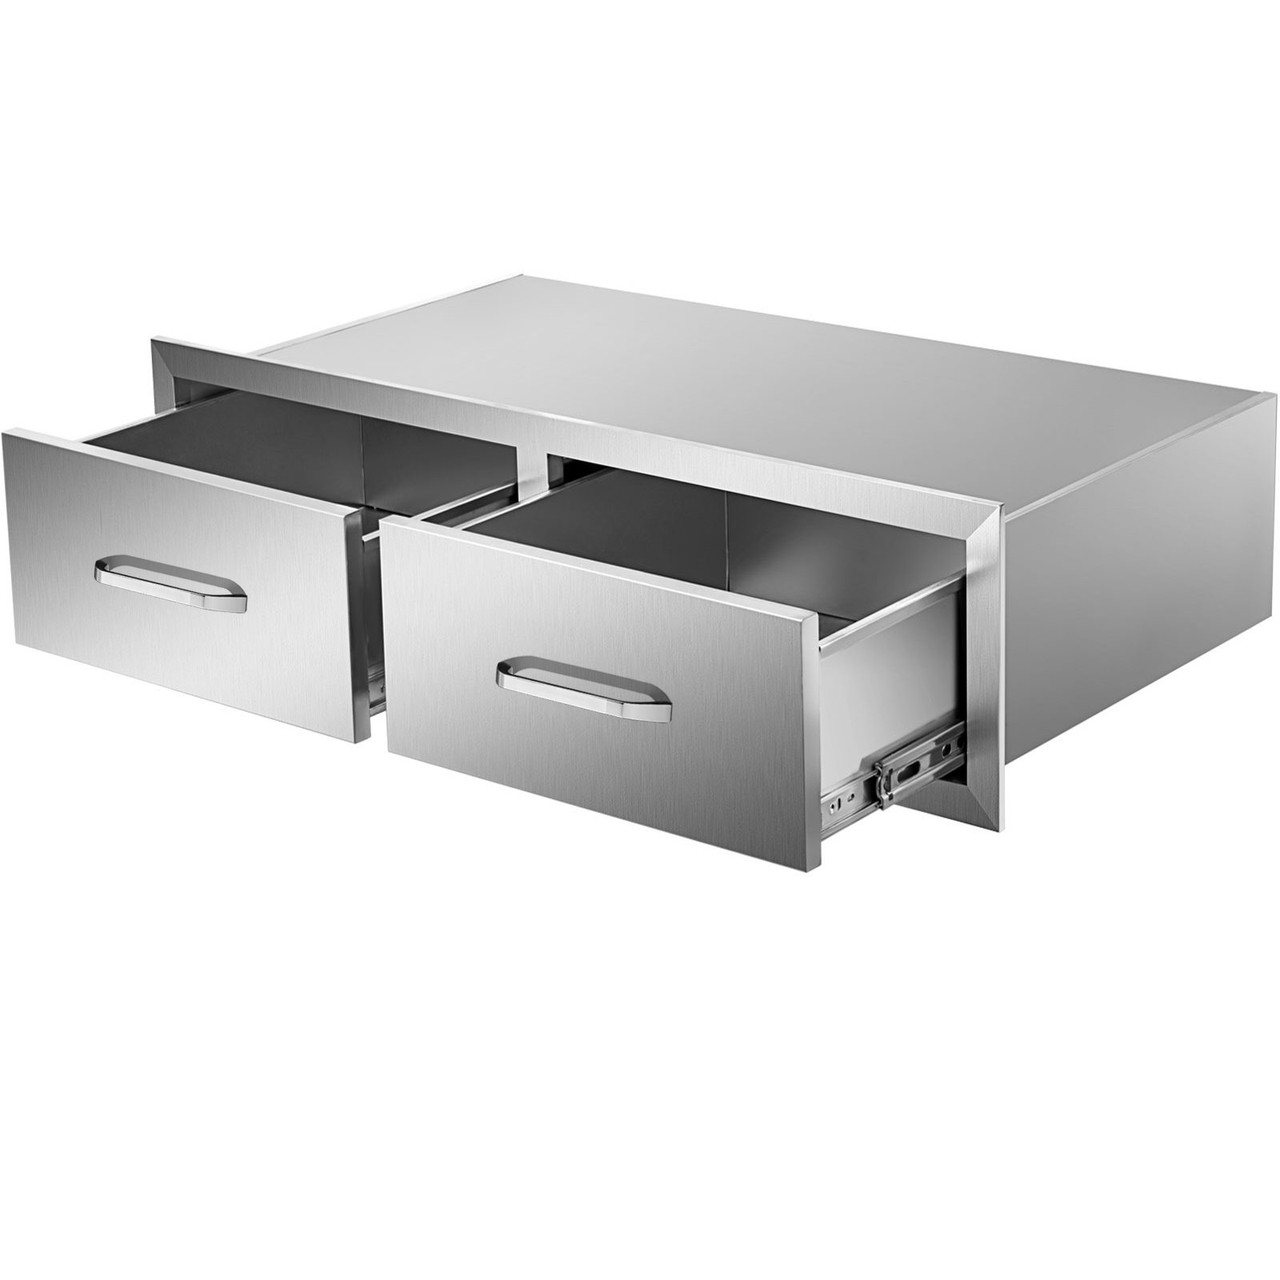 Outdoor Kitchen Drawers 30" W x 10" H x 20" D, Horizontal Double BBQ Access Drawers Stainless Steel with Handle, BBQ Island Drawers for Outdoor Kitchens or Patio Grill Station